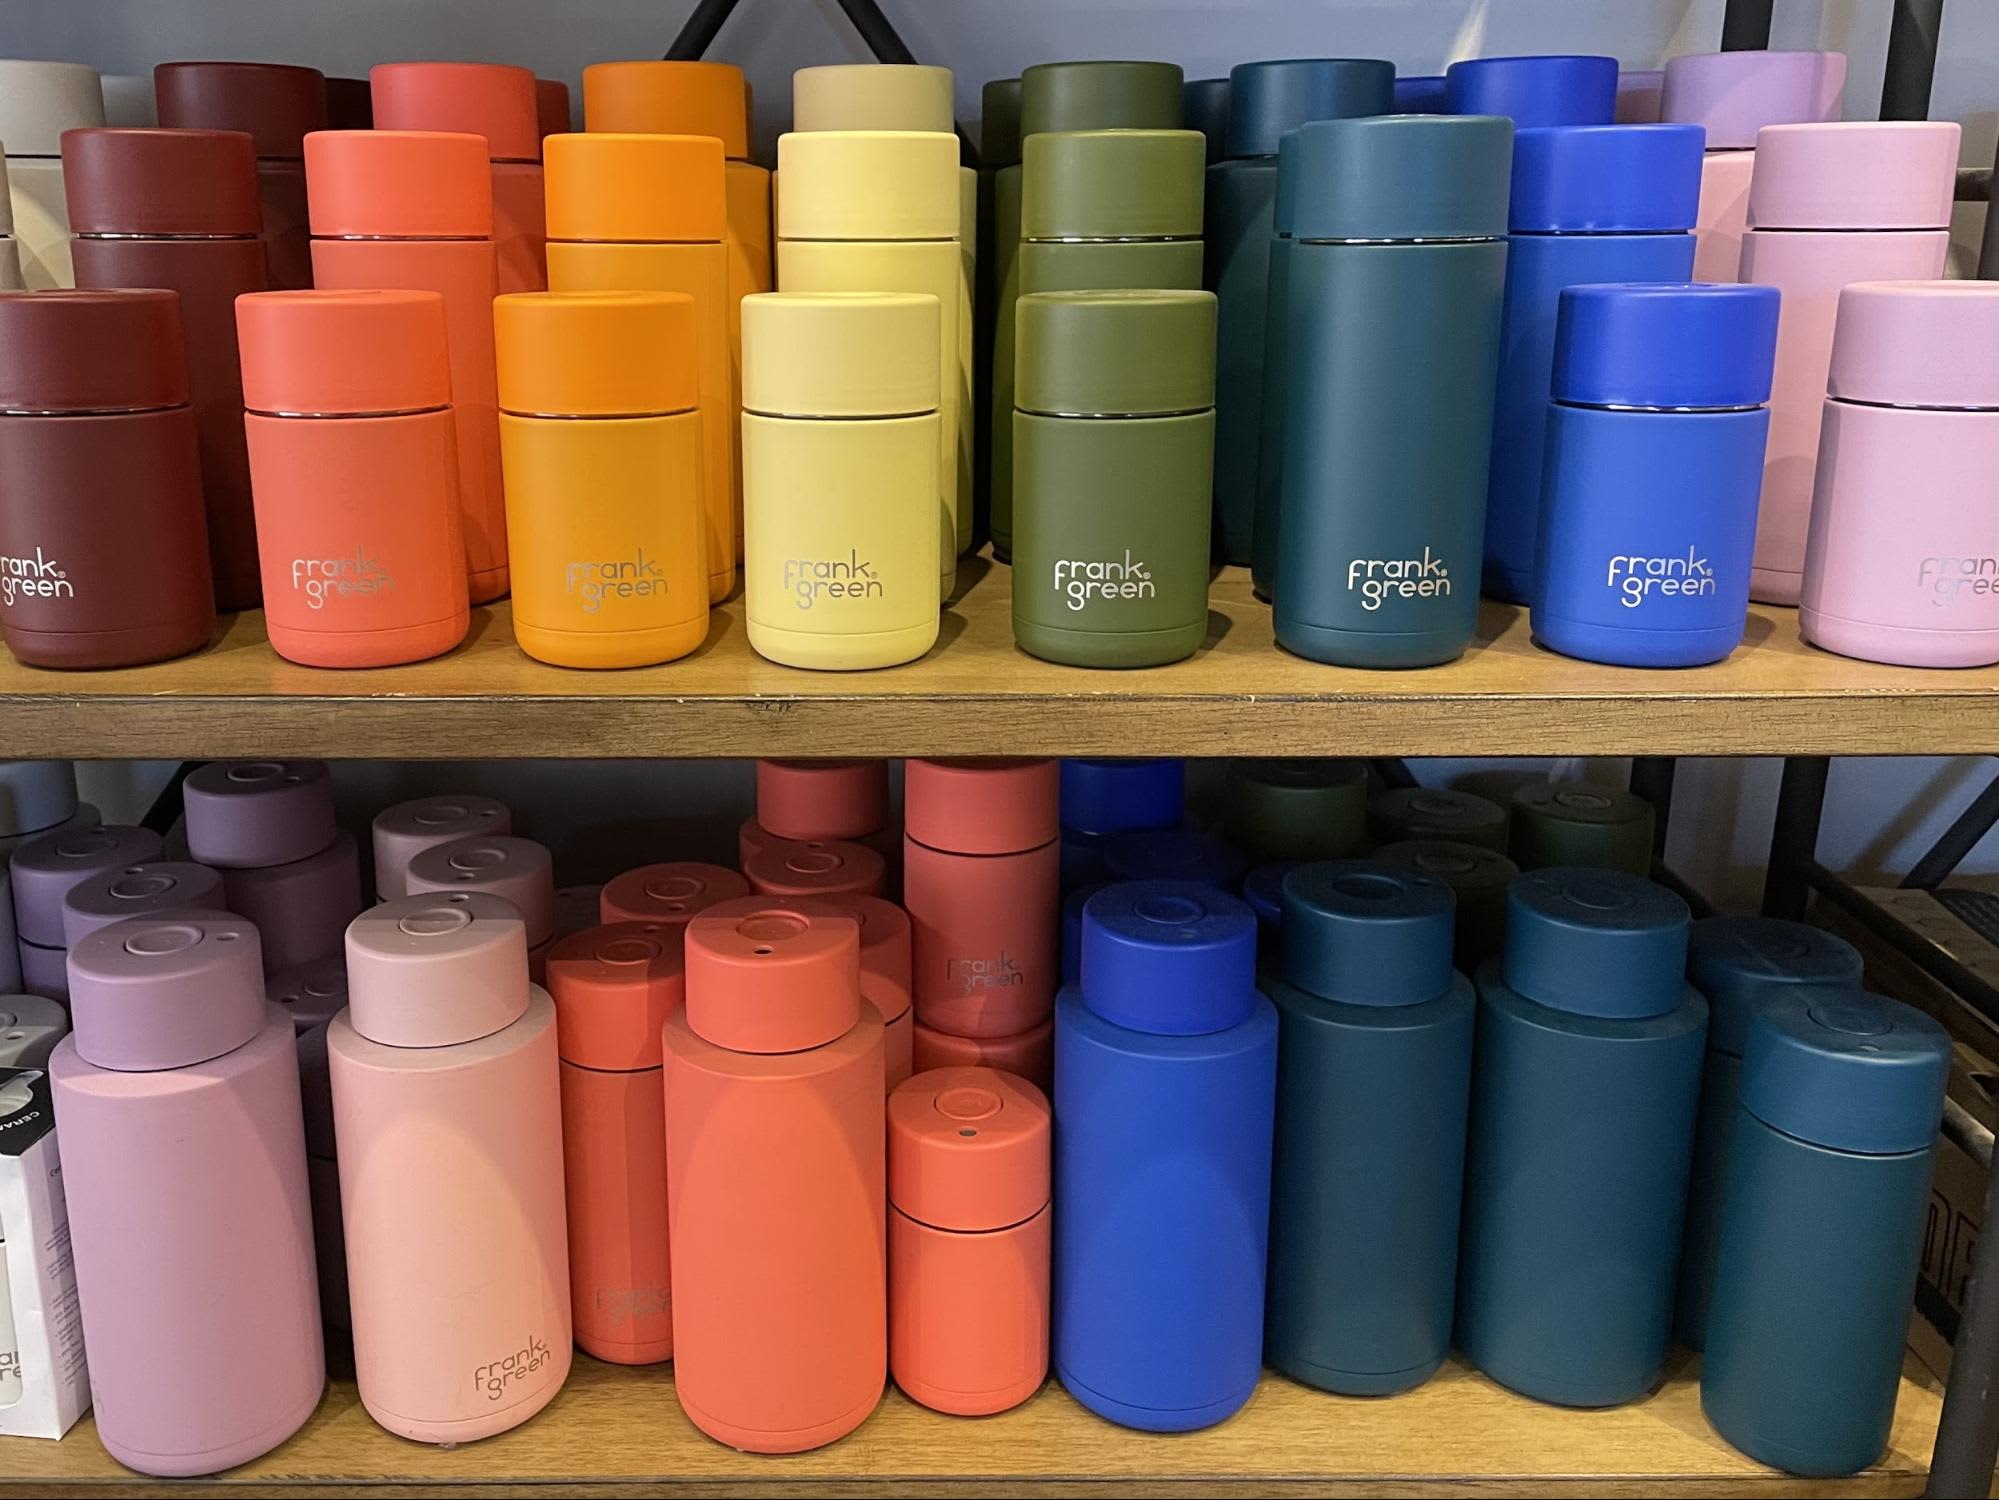 Frank Green Reusable Cup Review